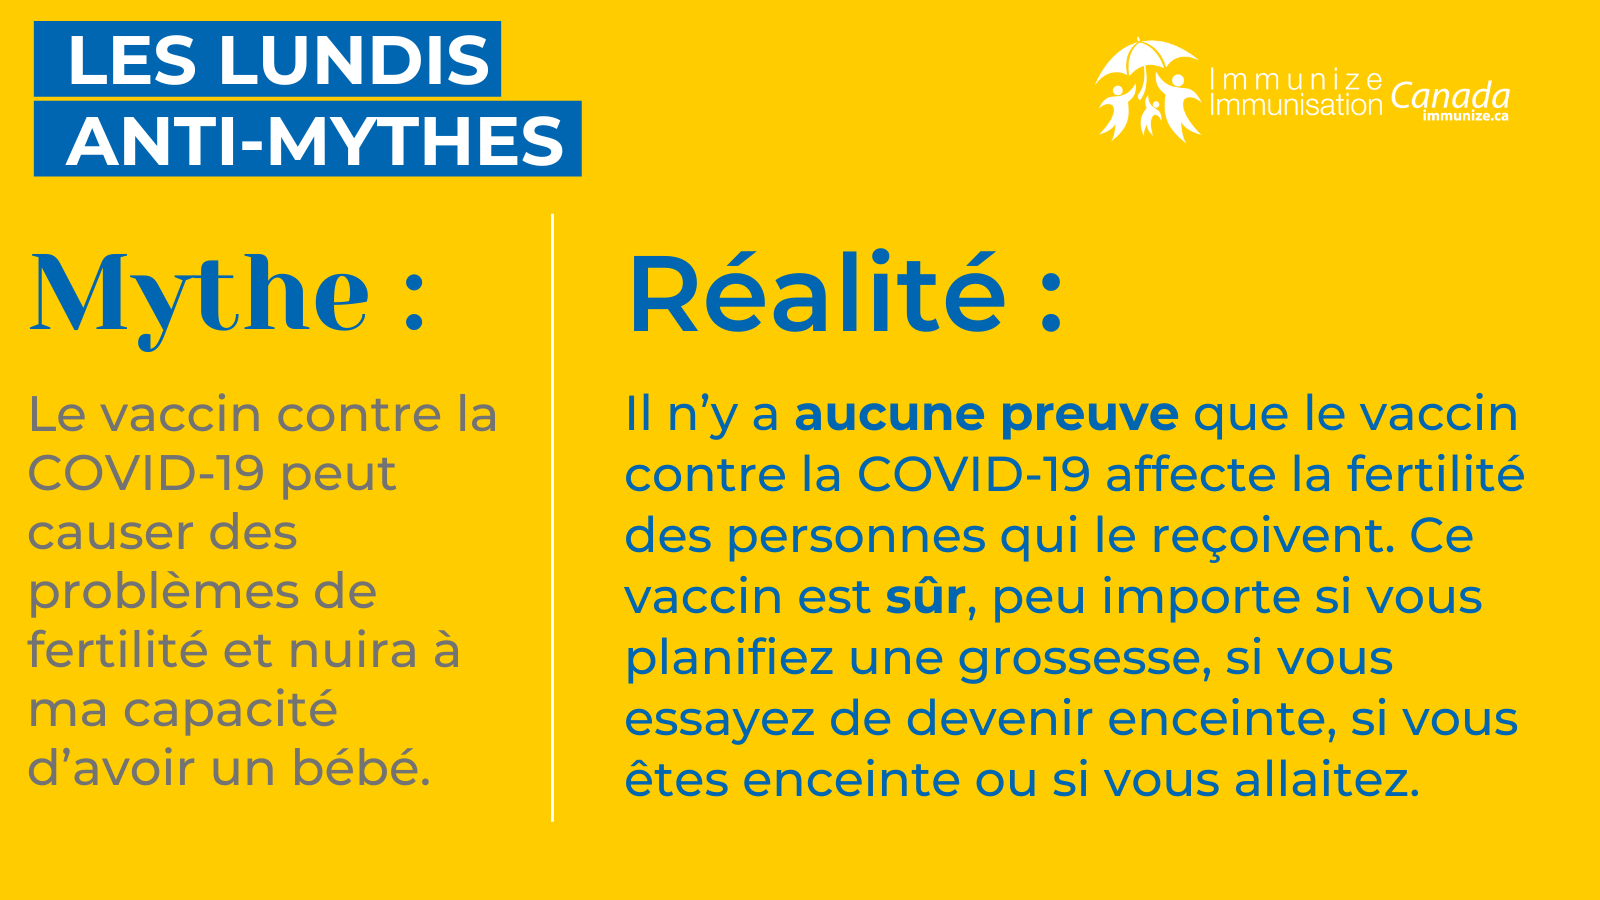 Les lundis anti-mythes - COVID-19 - image 3 pour Twitter/X